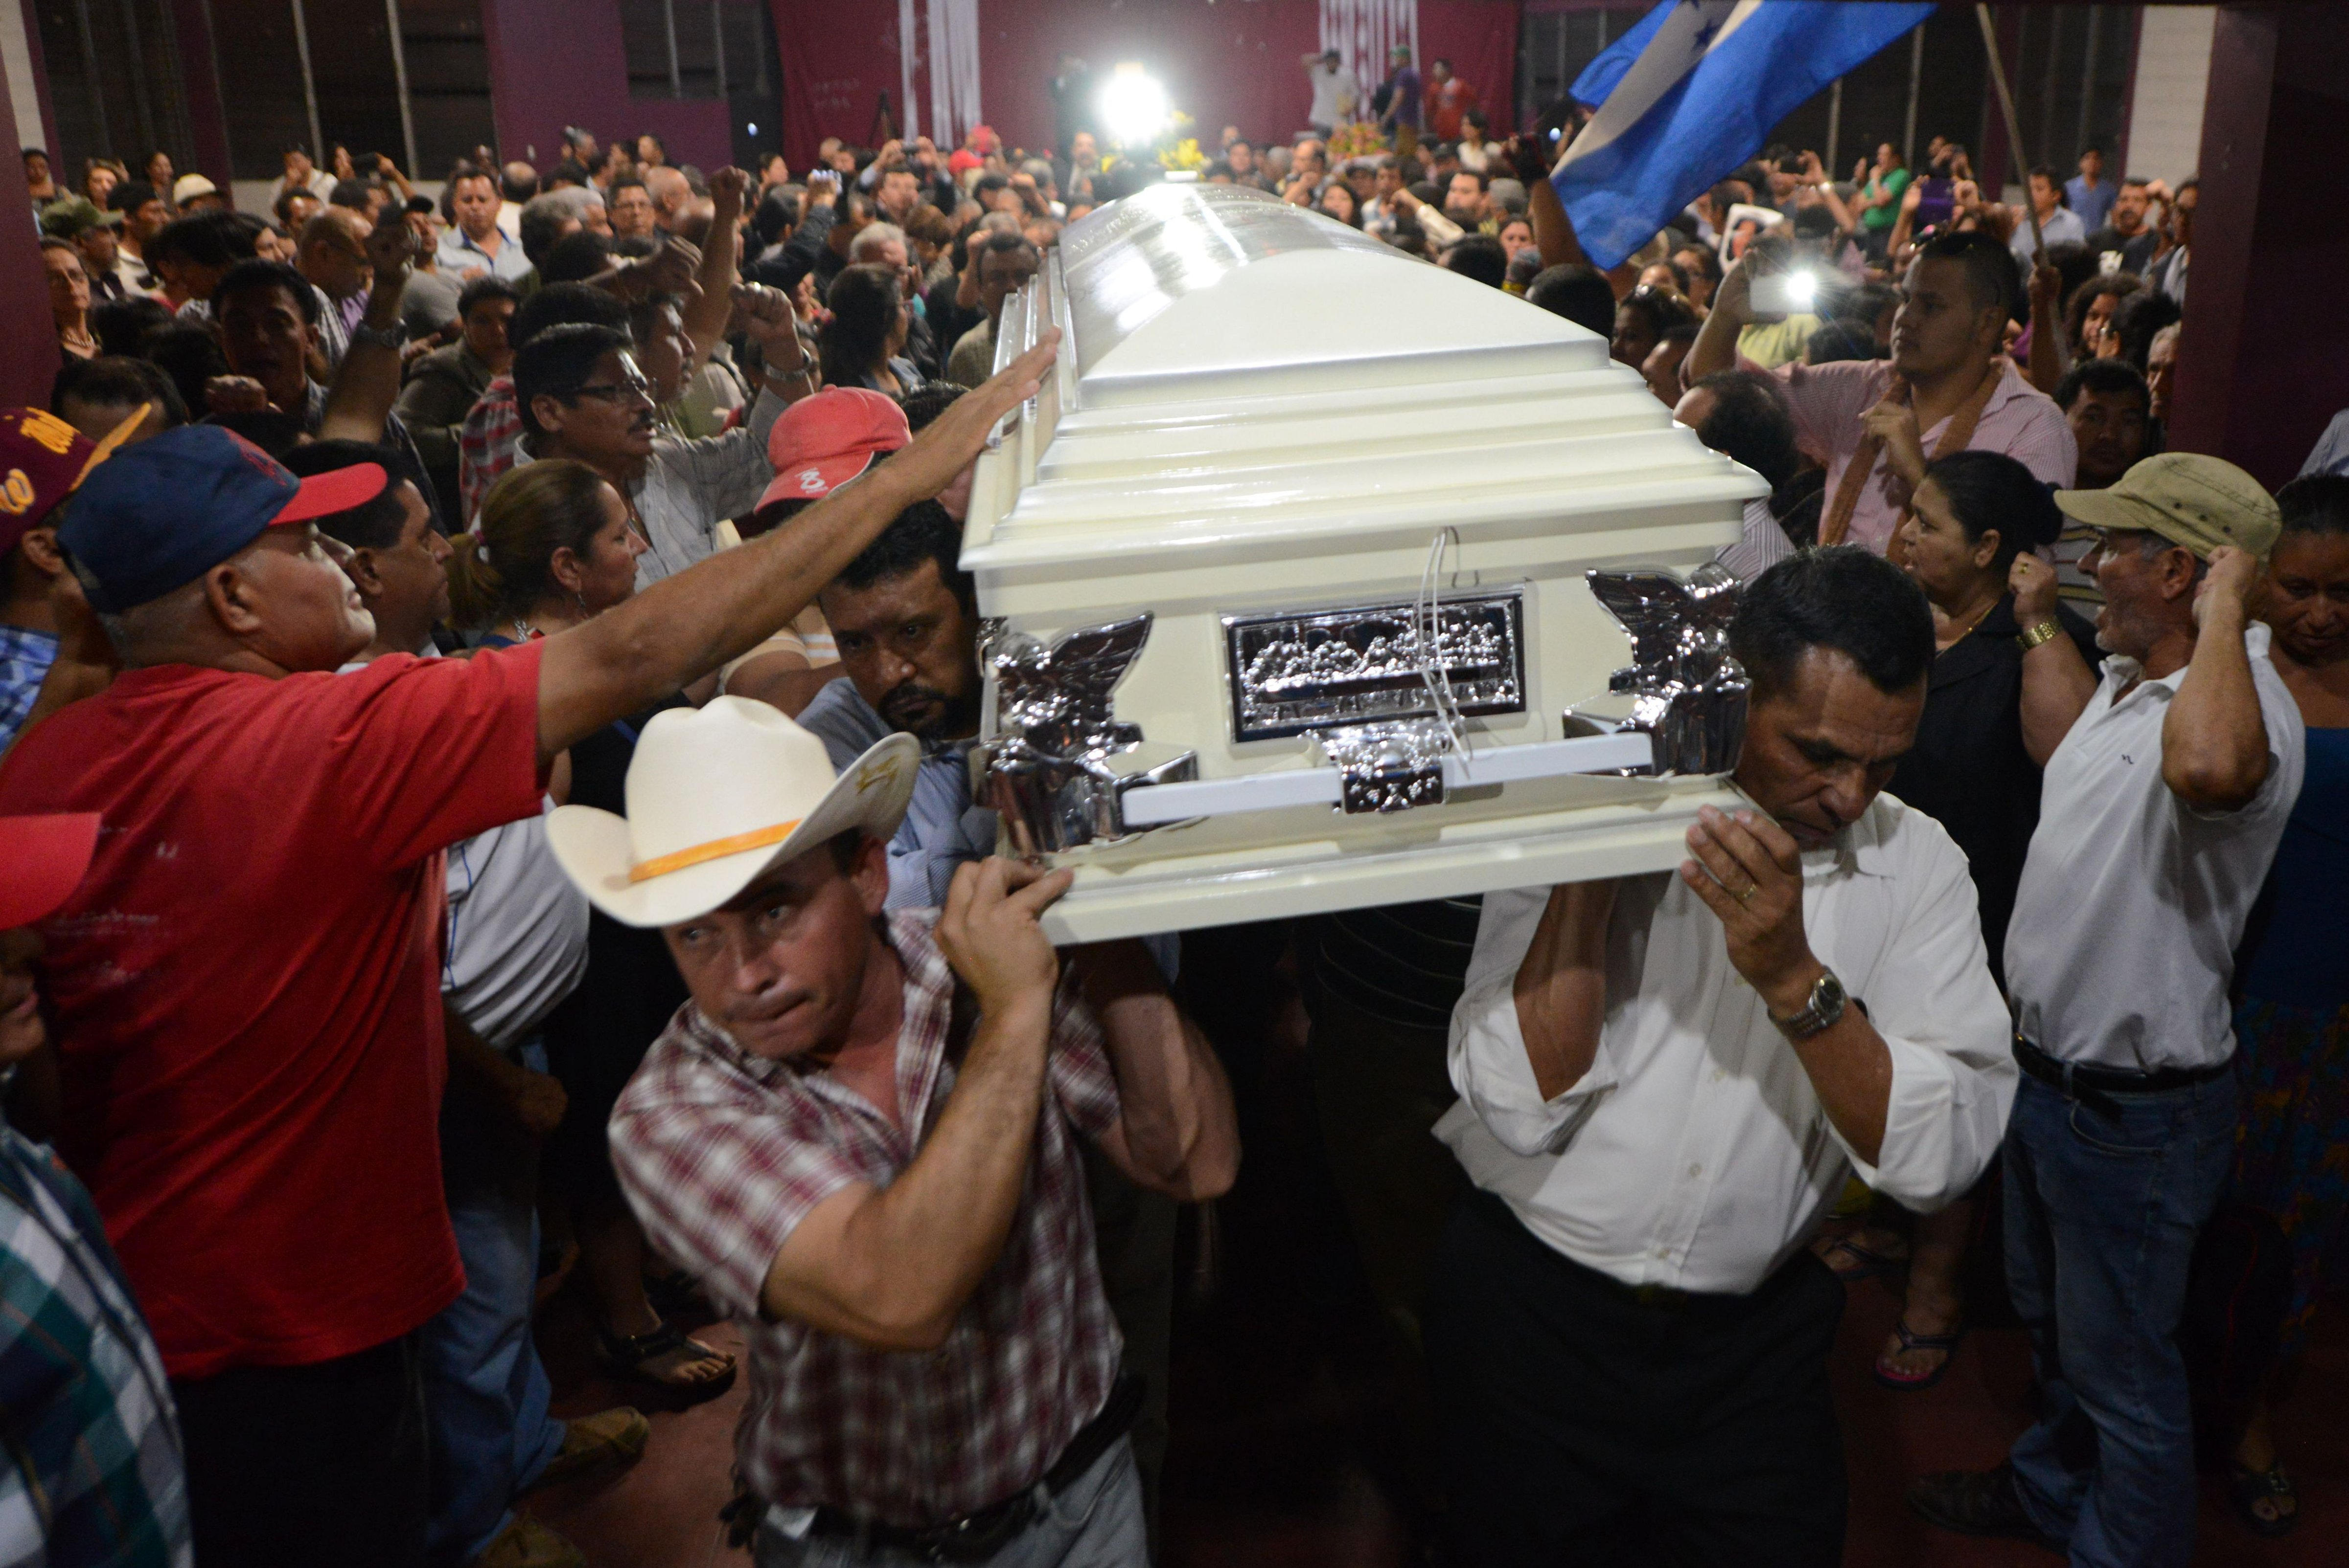 Relatives and friends carry the coffin of murdered indigenous activist Berta Cáceres during her funeral in La Esperanza, Honduras, on March 3, 2016 (Orlando Sierra—AFP/Getty Images)